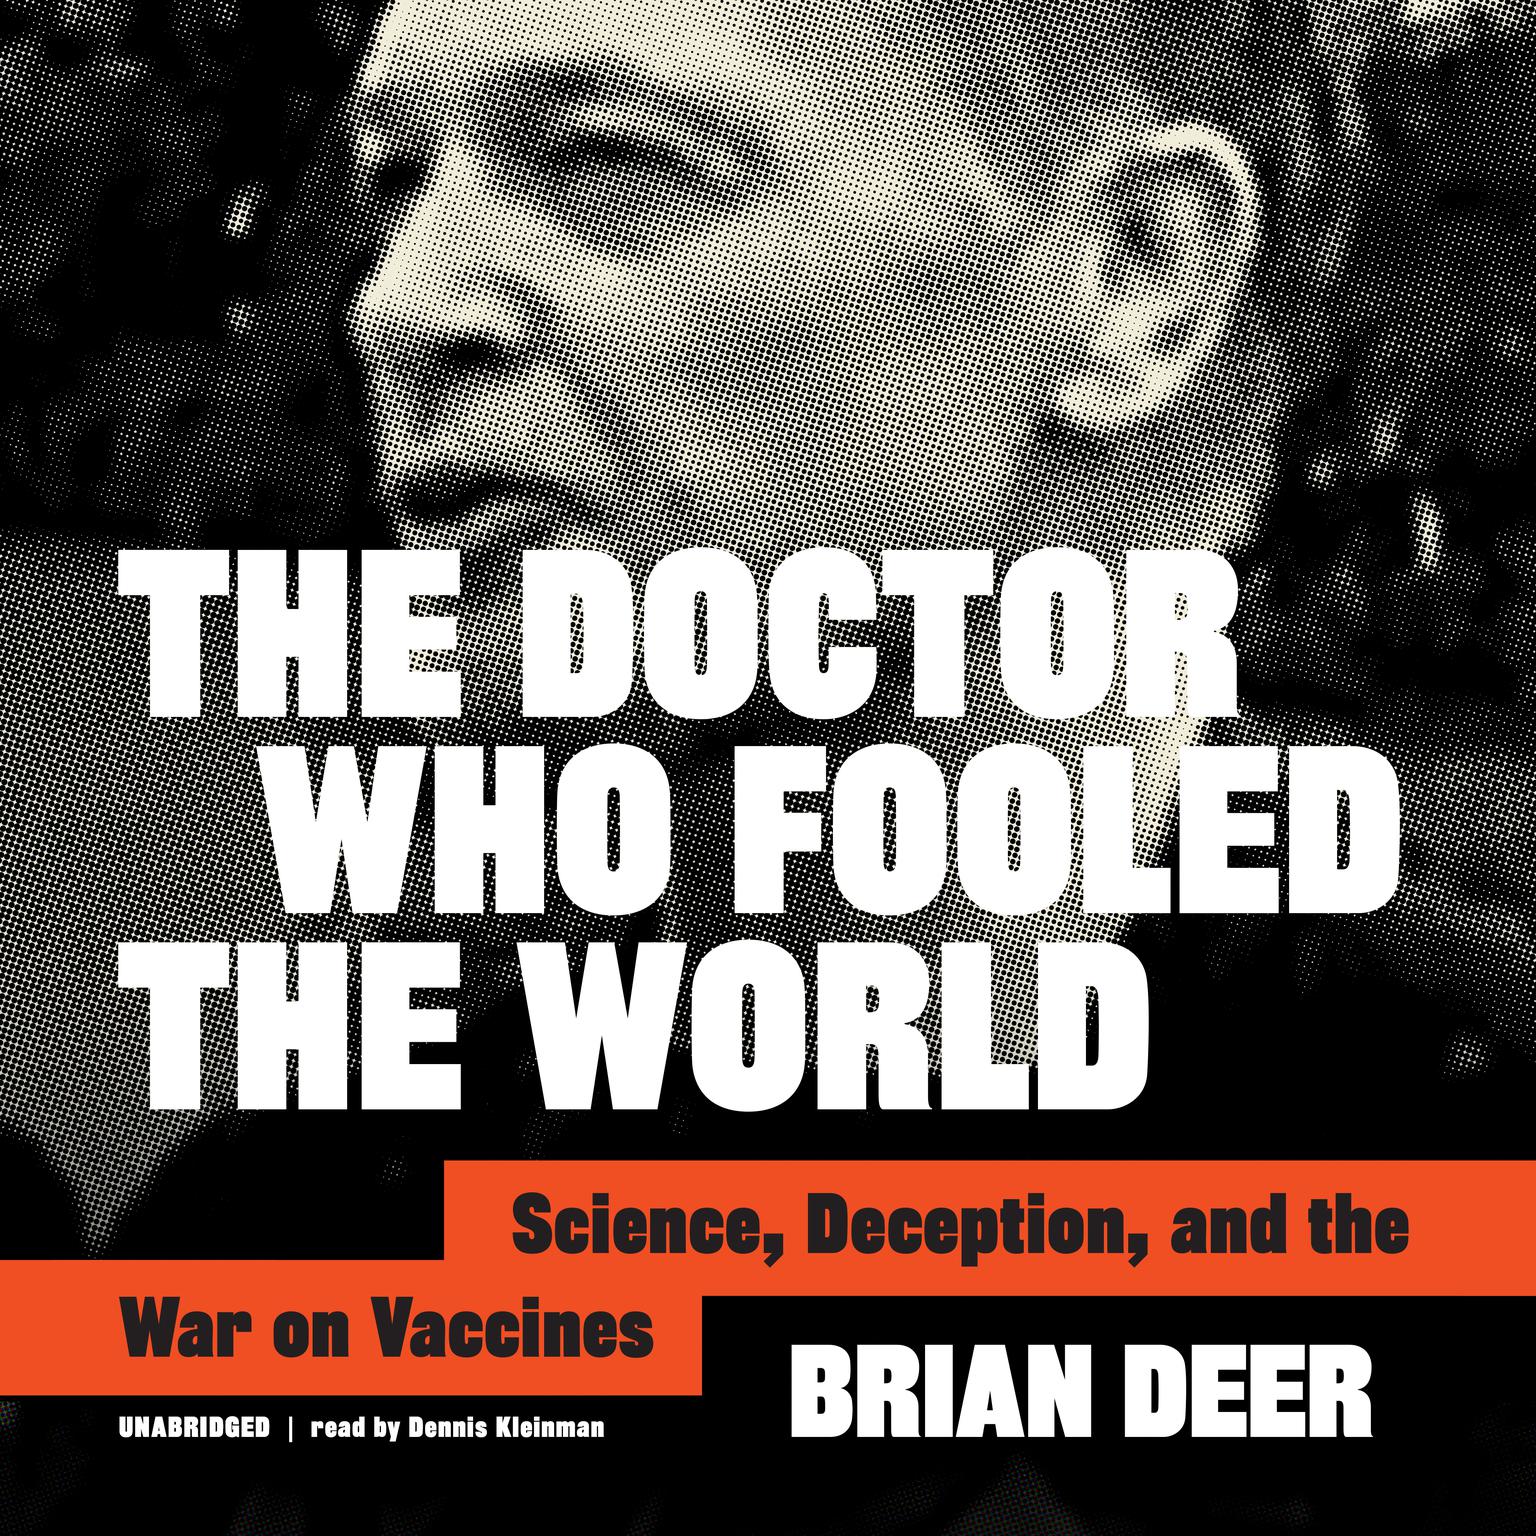 The Doctor Who Fooled the World: Science, Deception, and the War on Vaccines Audiobook, by Brian Deer